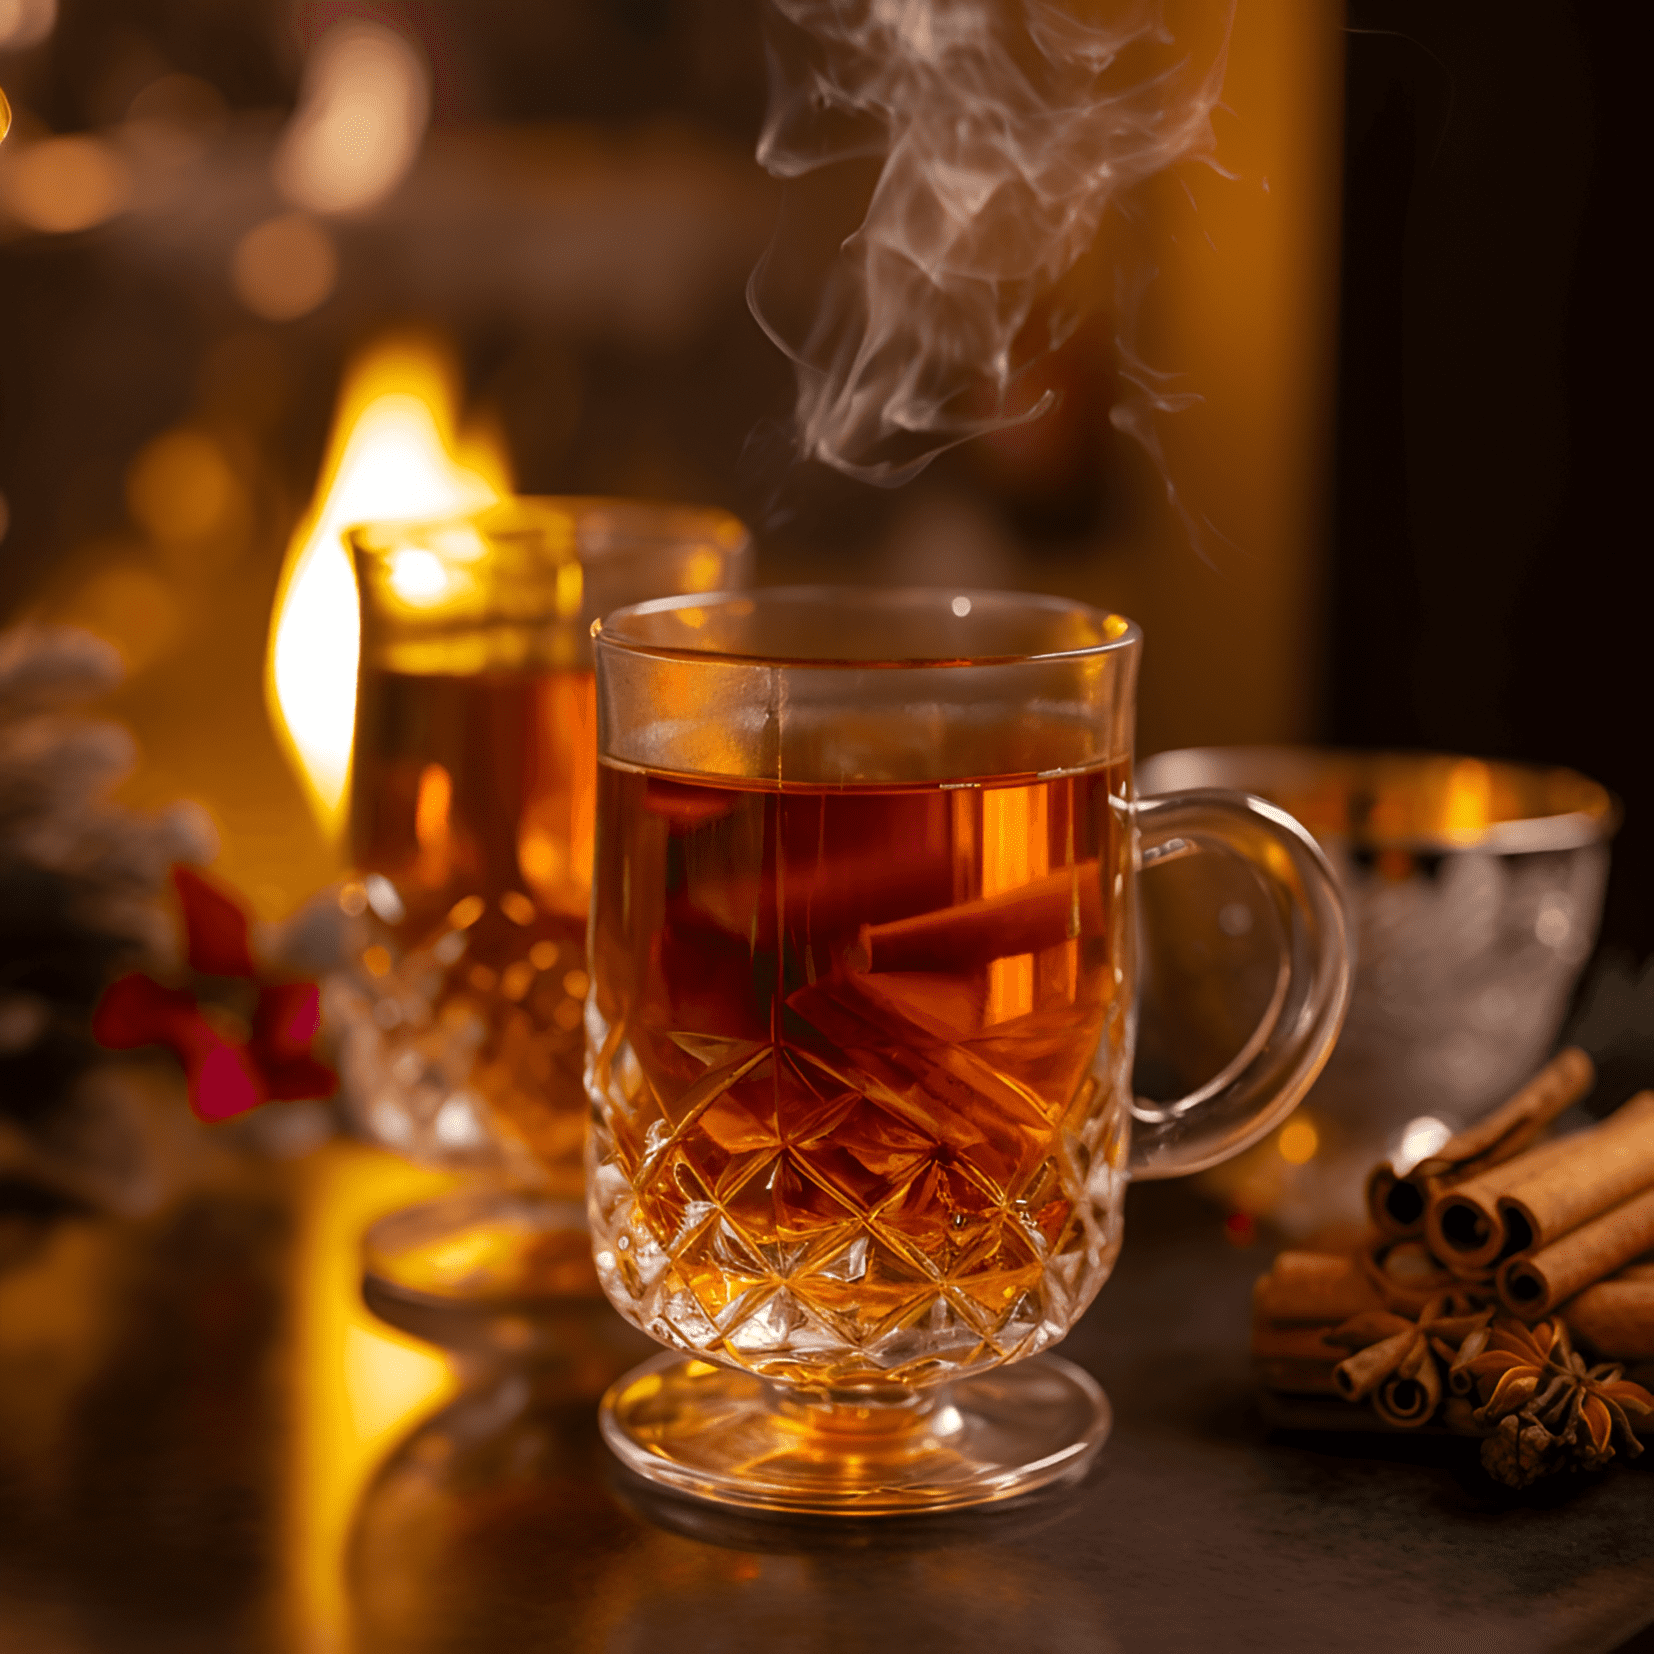 The Hot Toddy is a warm, soothing, and comforting cocktail with a perfect balance of sweet, sour, and spicy flavors. The sweetness of honey and the warmth of whiskey are complemented by the tanginess of lemon and the subtle spiciness of cinnamon and cloves.